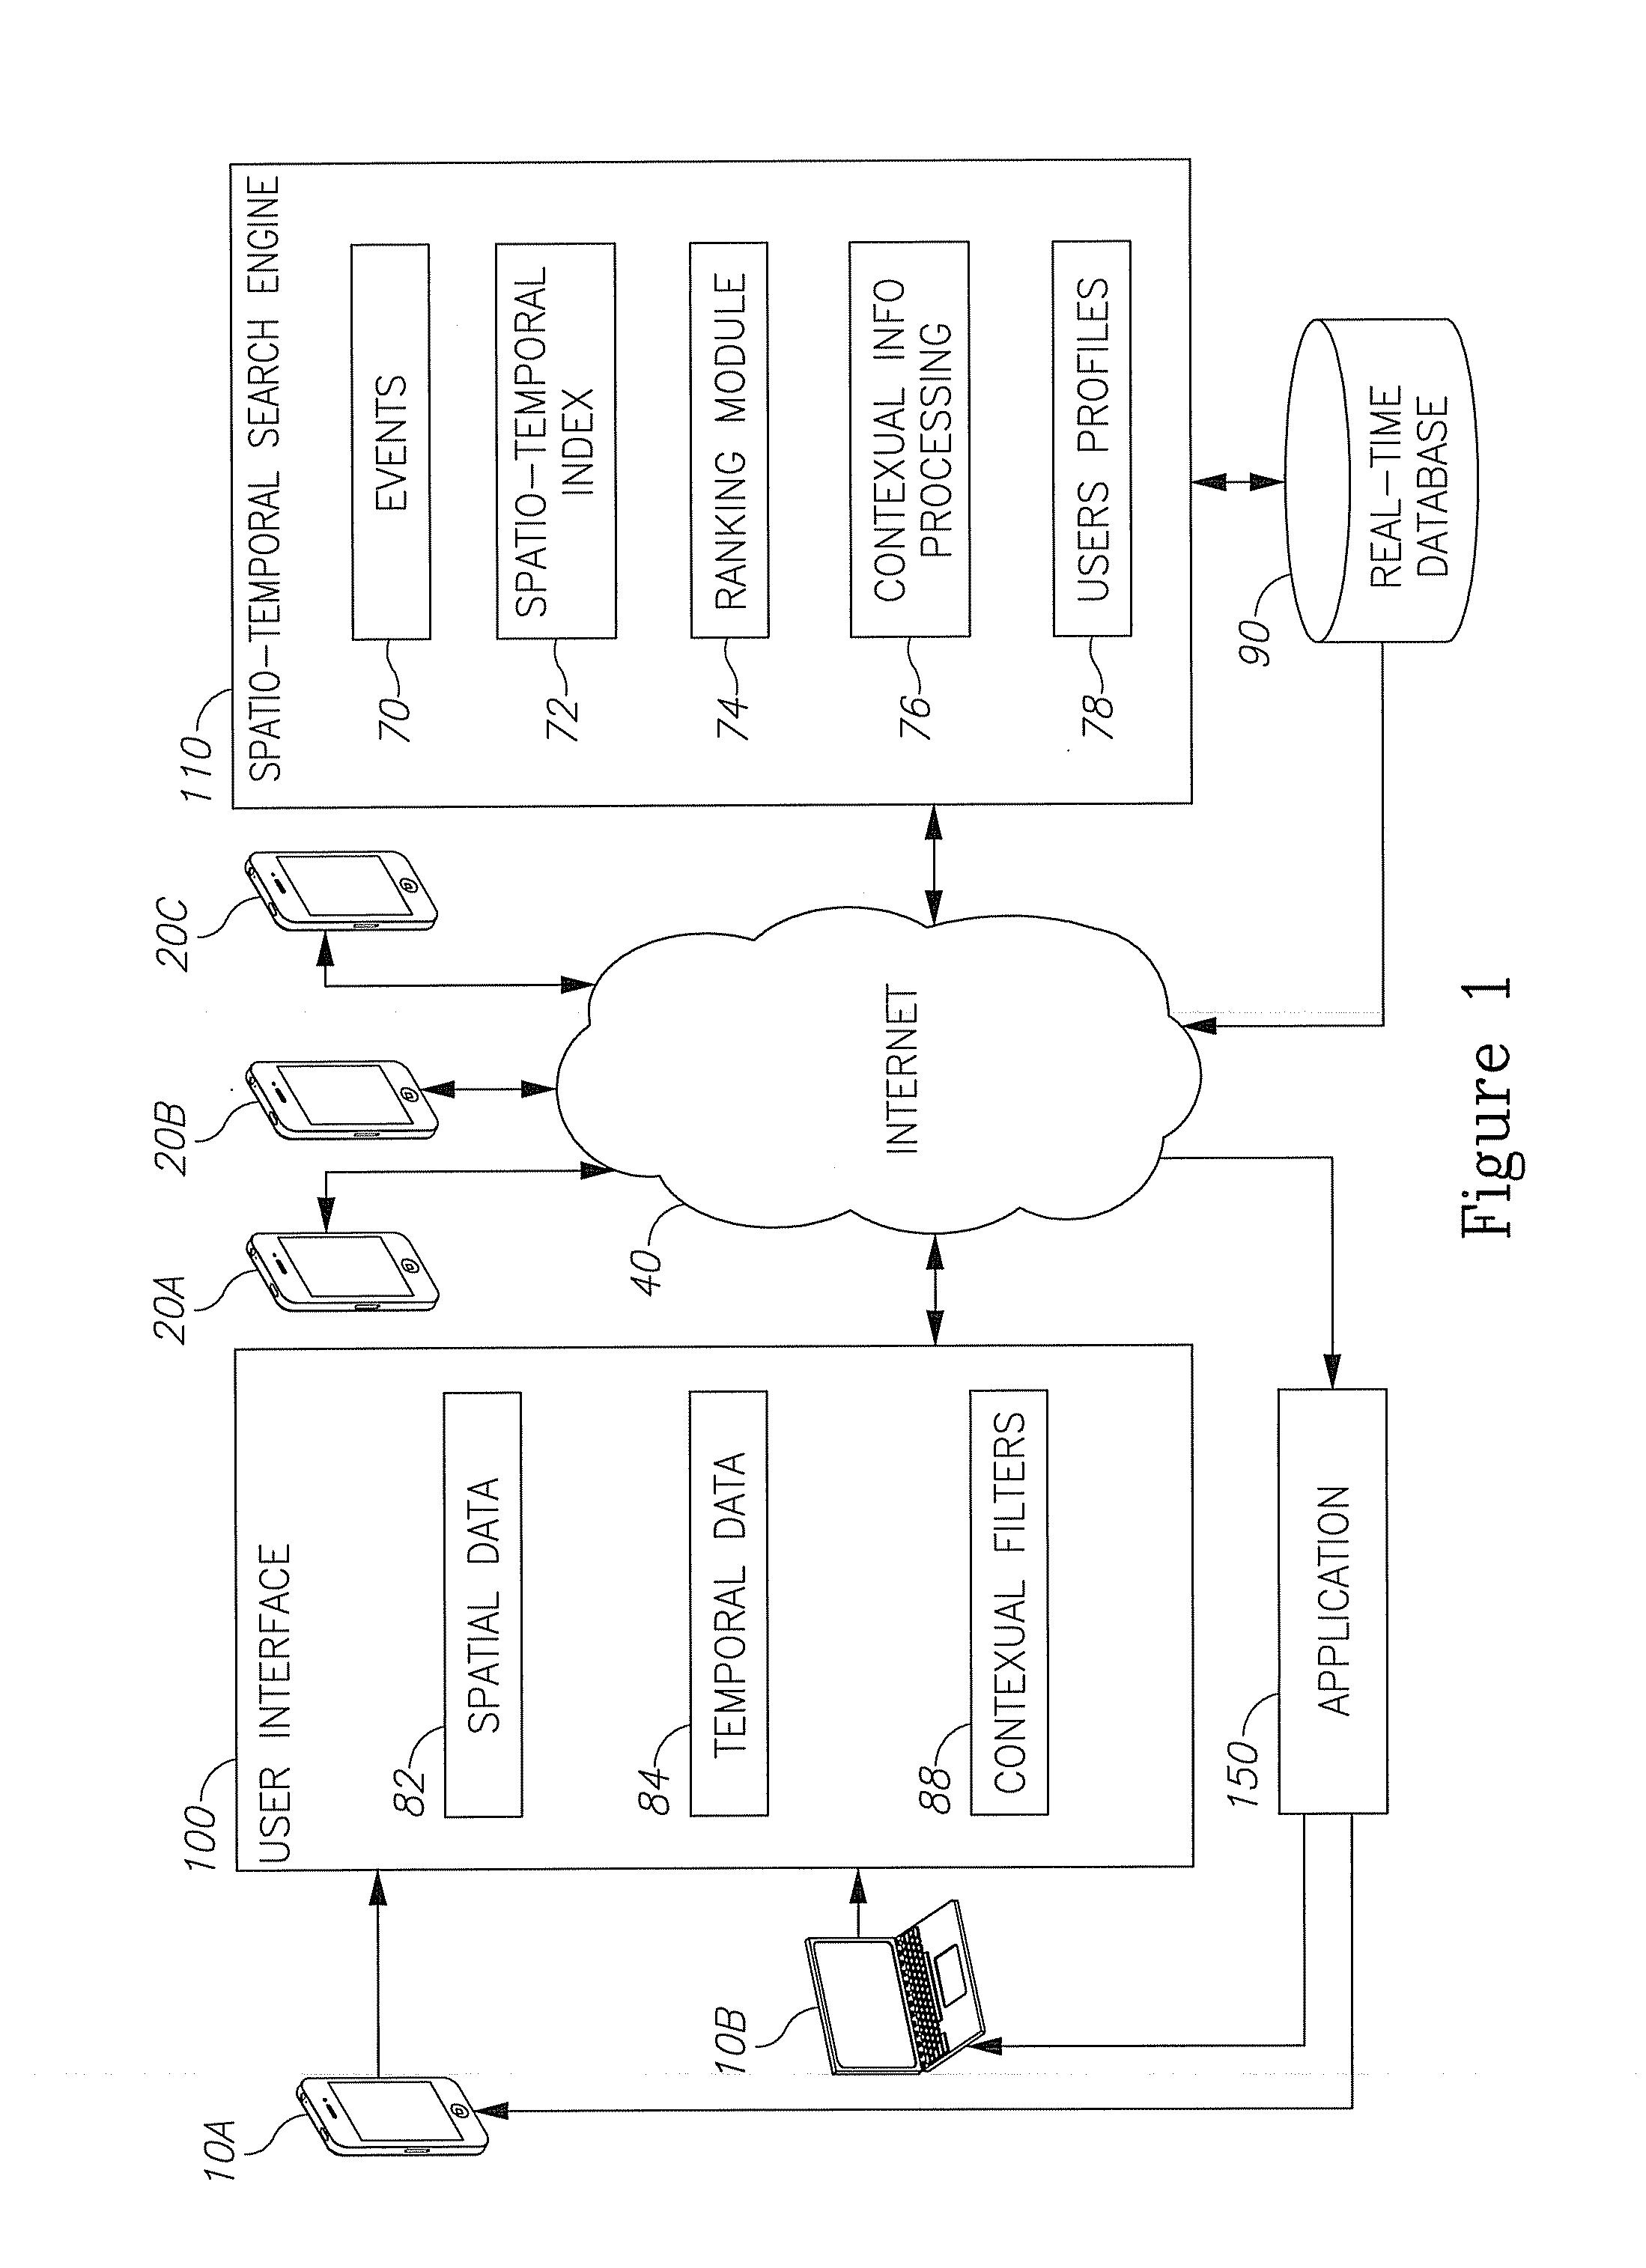 System and method for conducting spatio-temporal search using real time crowd sourcing